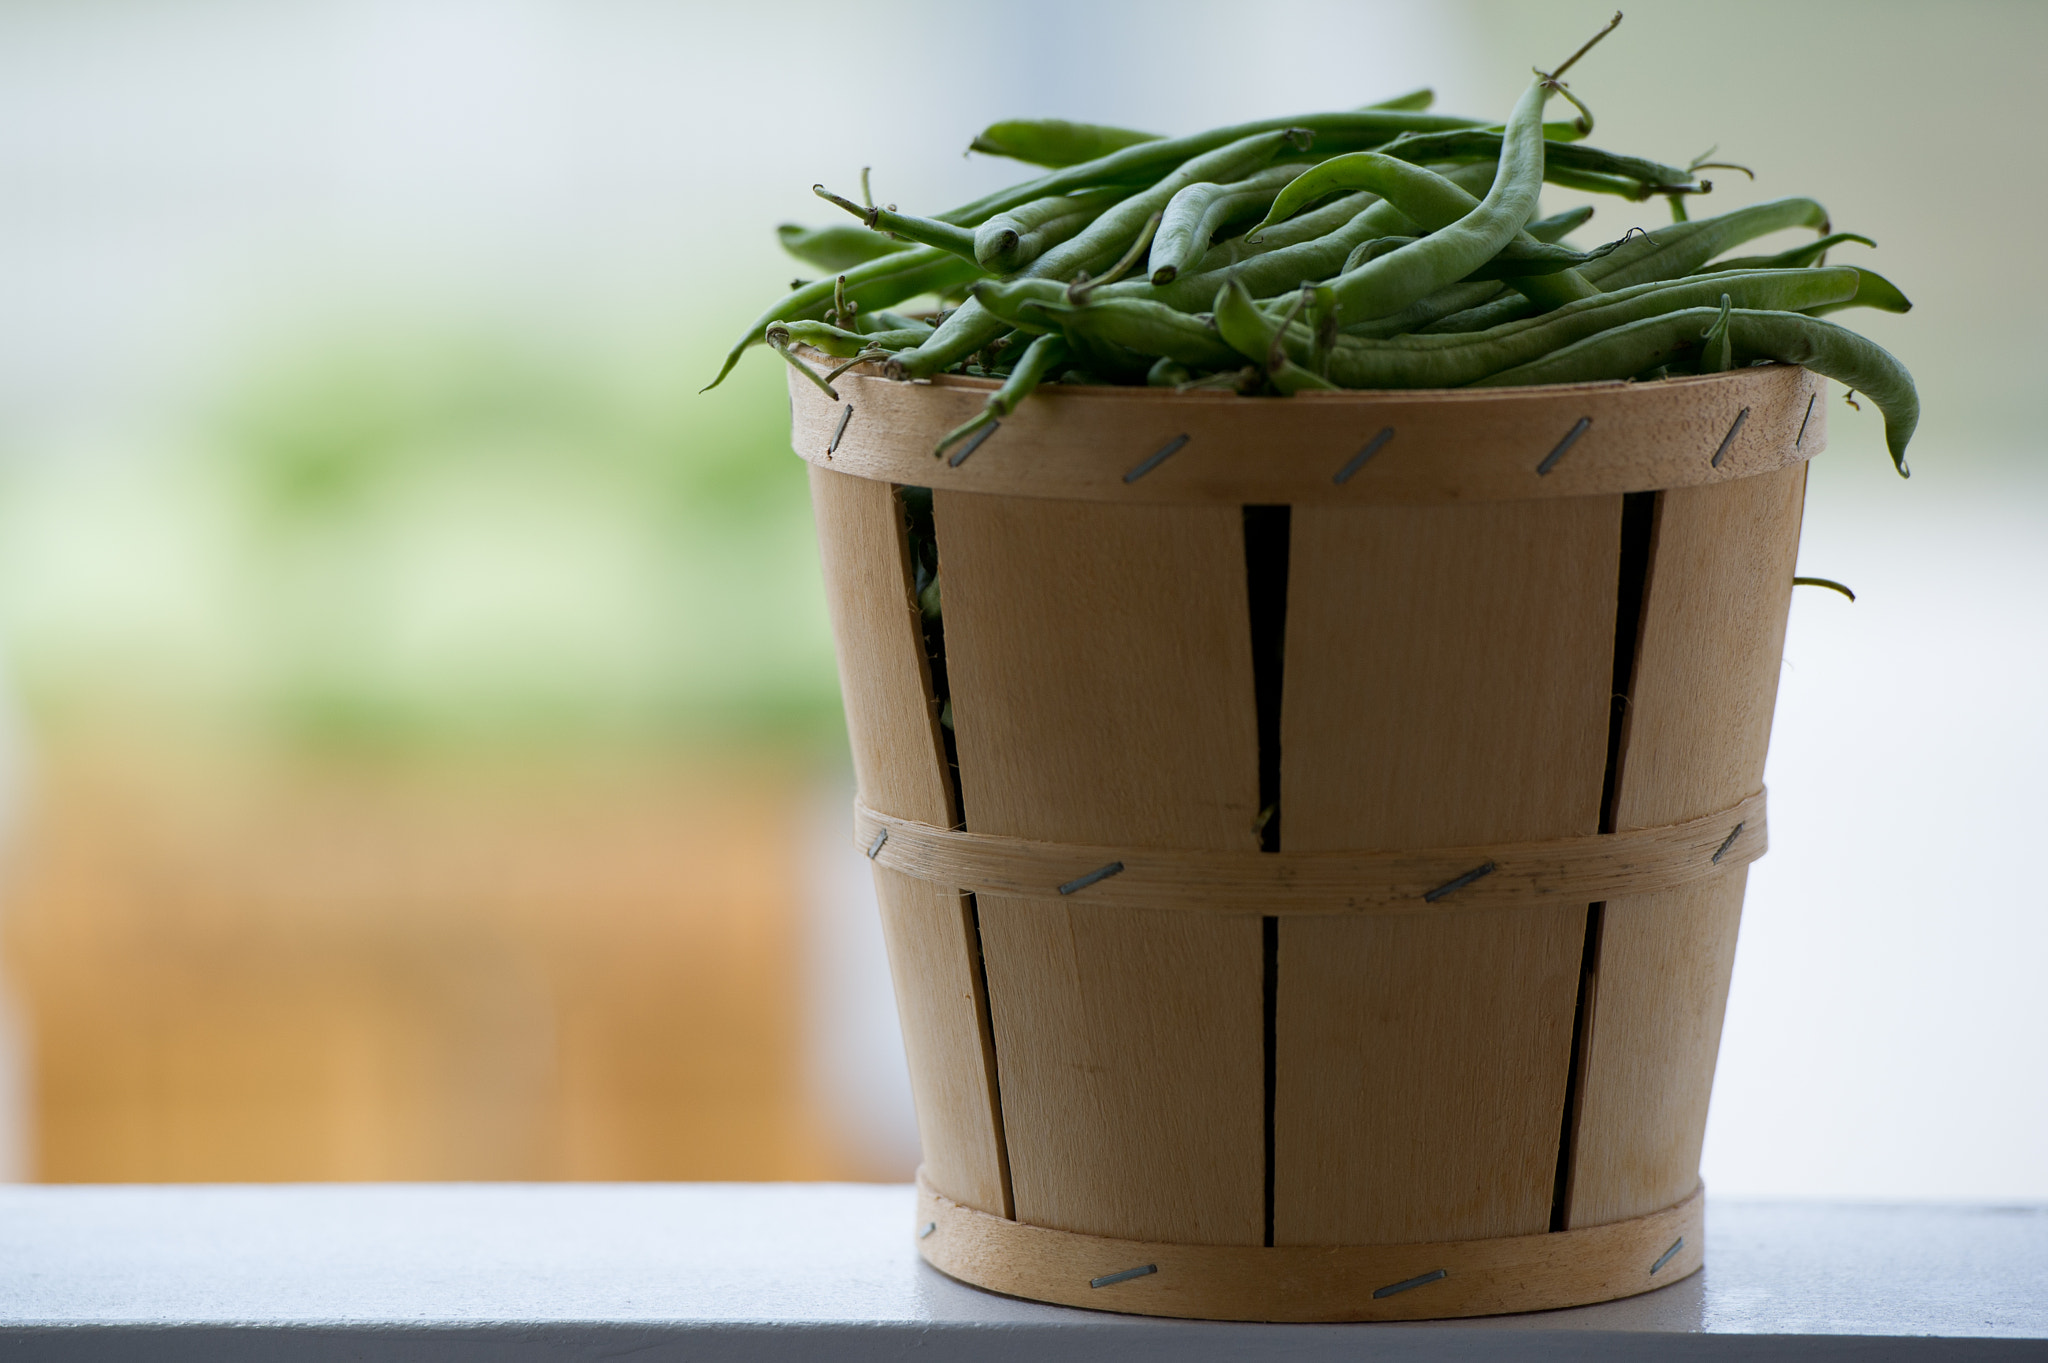 Nikon D3S sample photo. Crate of fresh string beans at farm stand photography